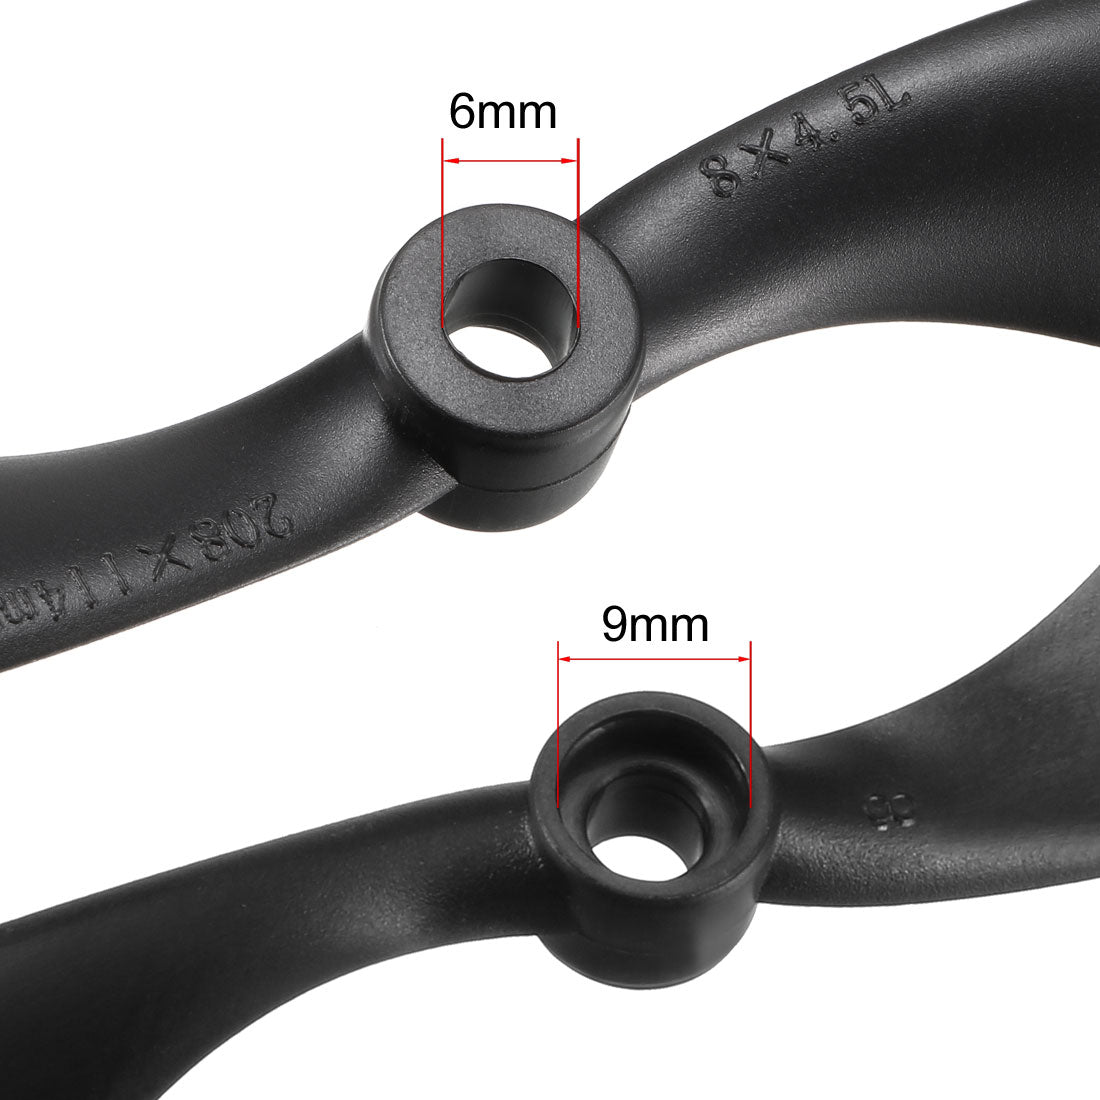 uxcell Uxcell RC Propellers  C 8045 8x4.5 Inch 2-Vane Fixed-Wing for Airplane Toy, Nylon Black 2 Pairs with Adapter Rings